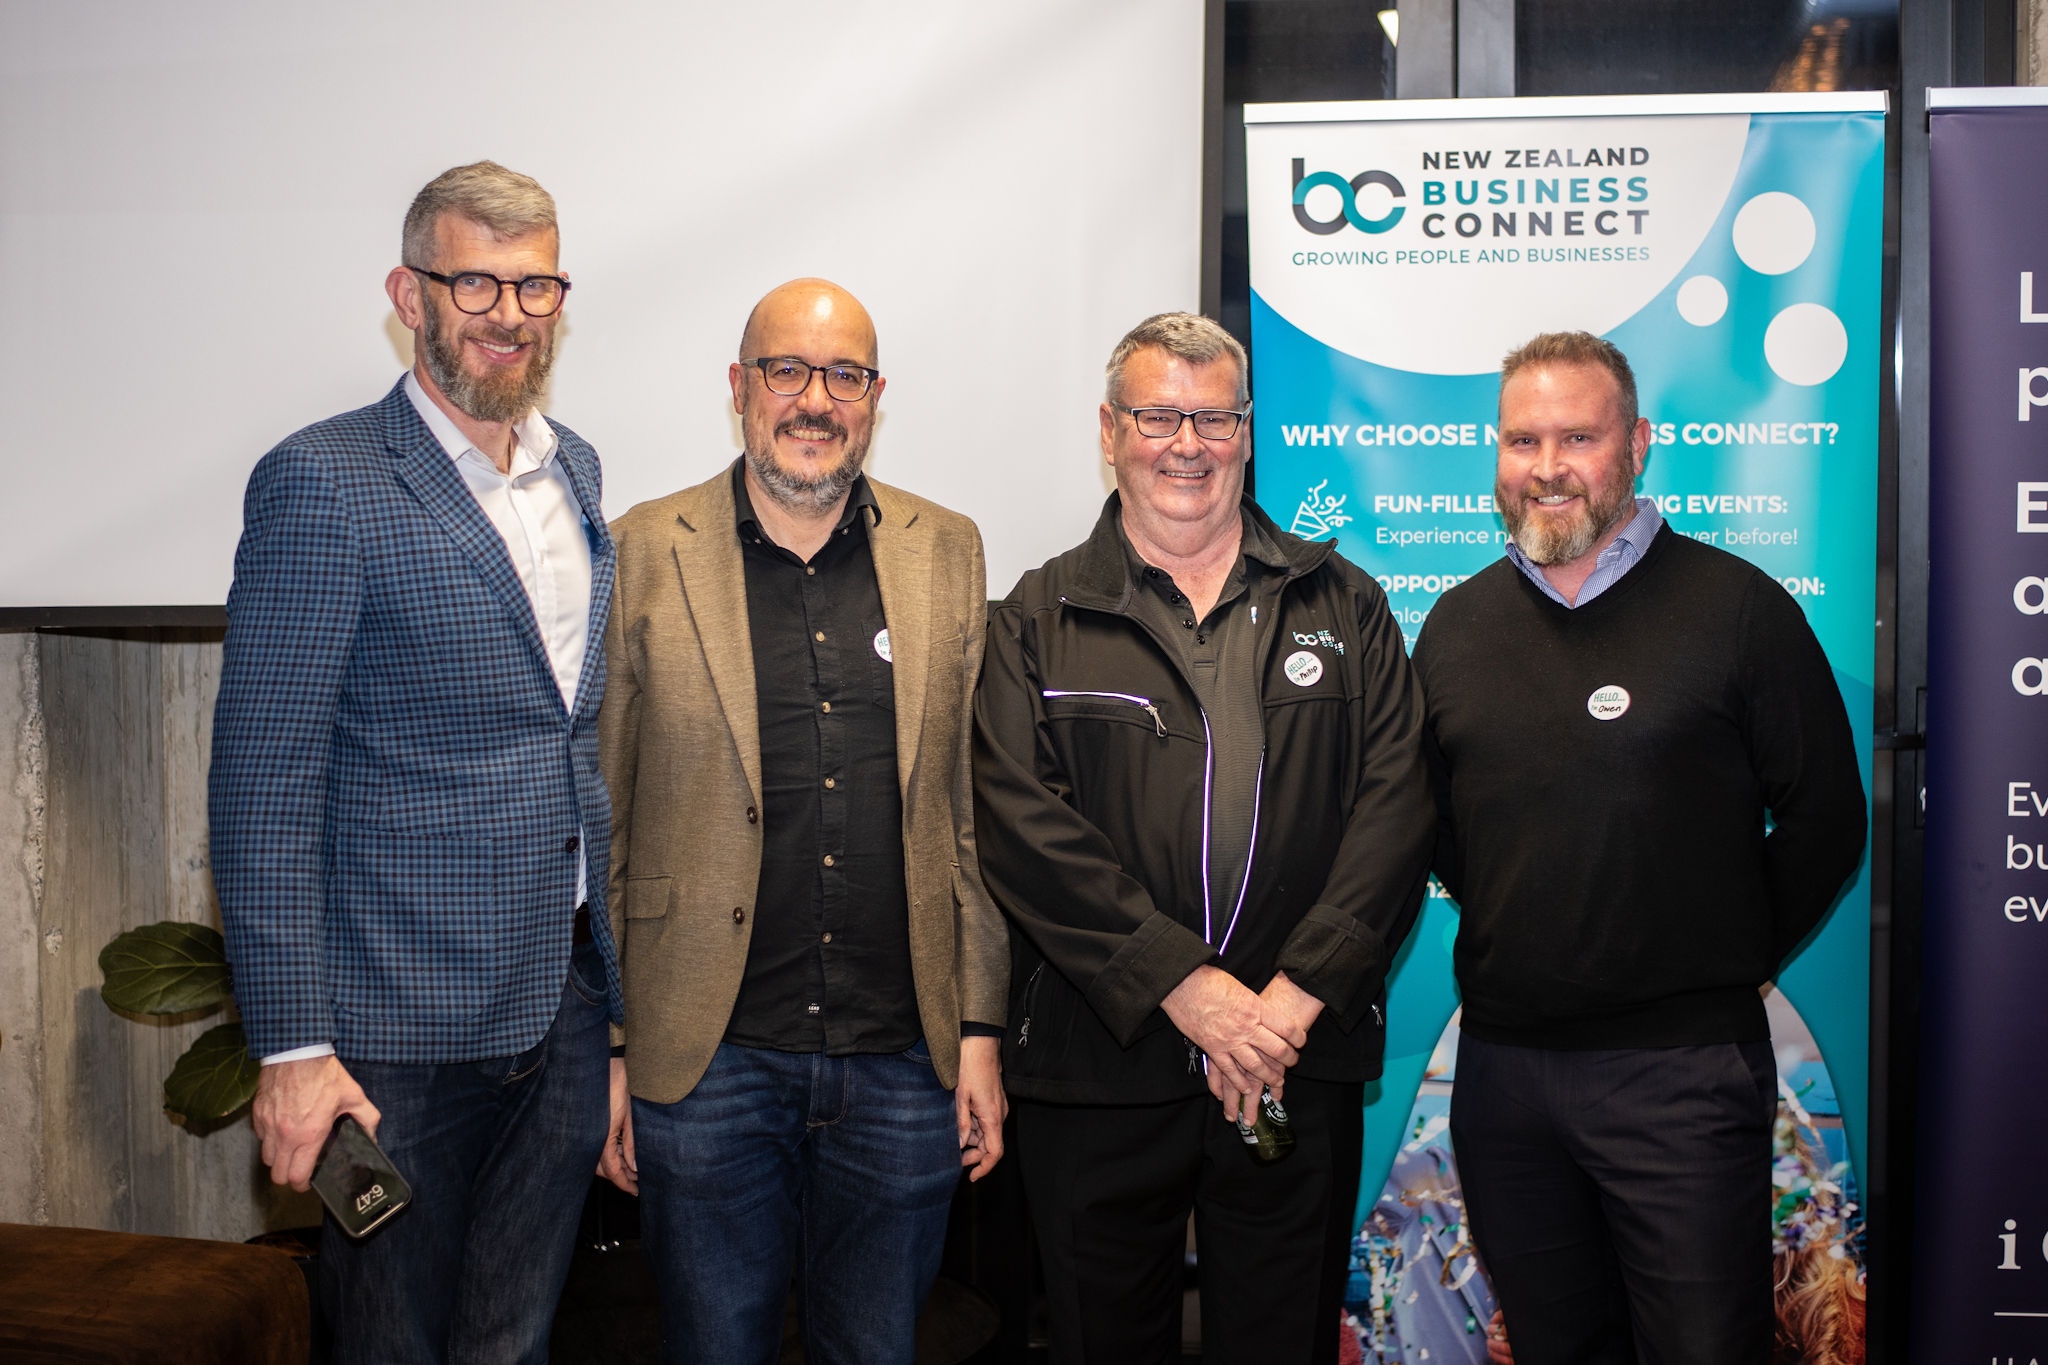 AI Seminar Hosted by NZ Business Connect: A Transformative Networking Event Sponsored by iCLAW | Hamilton